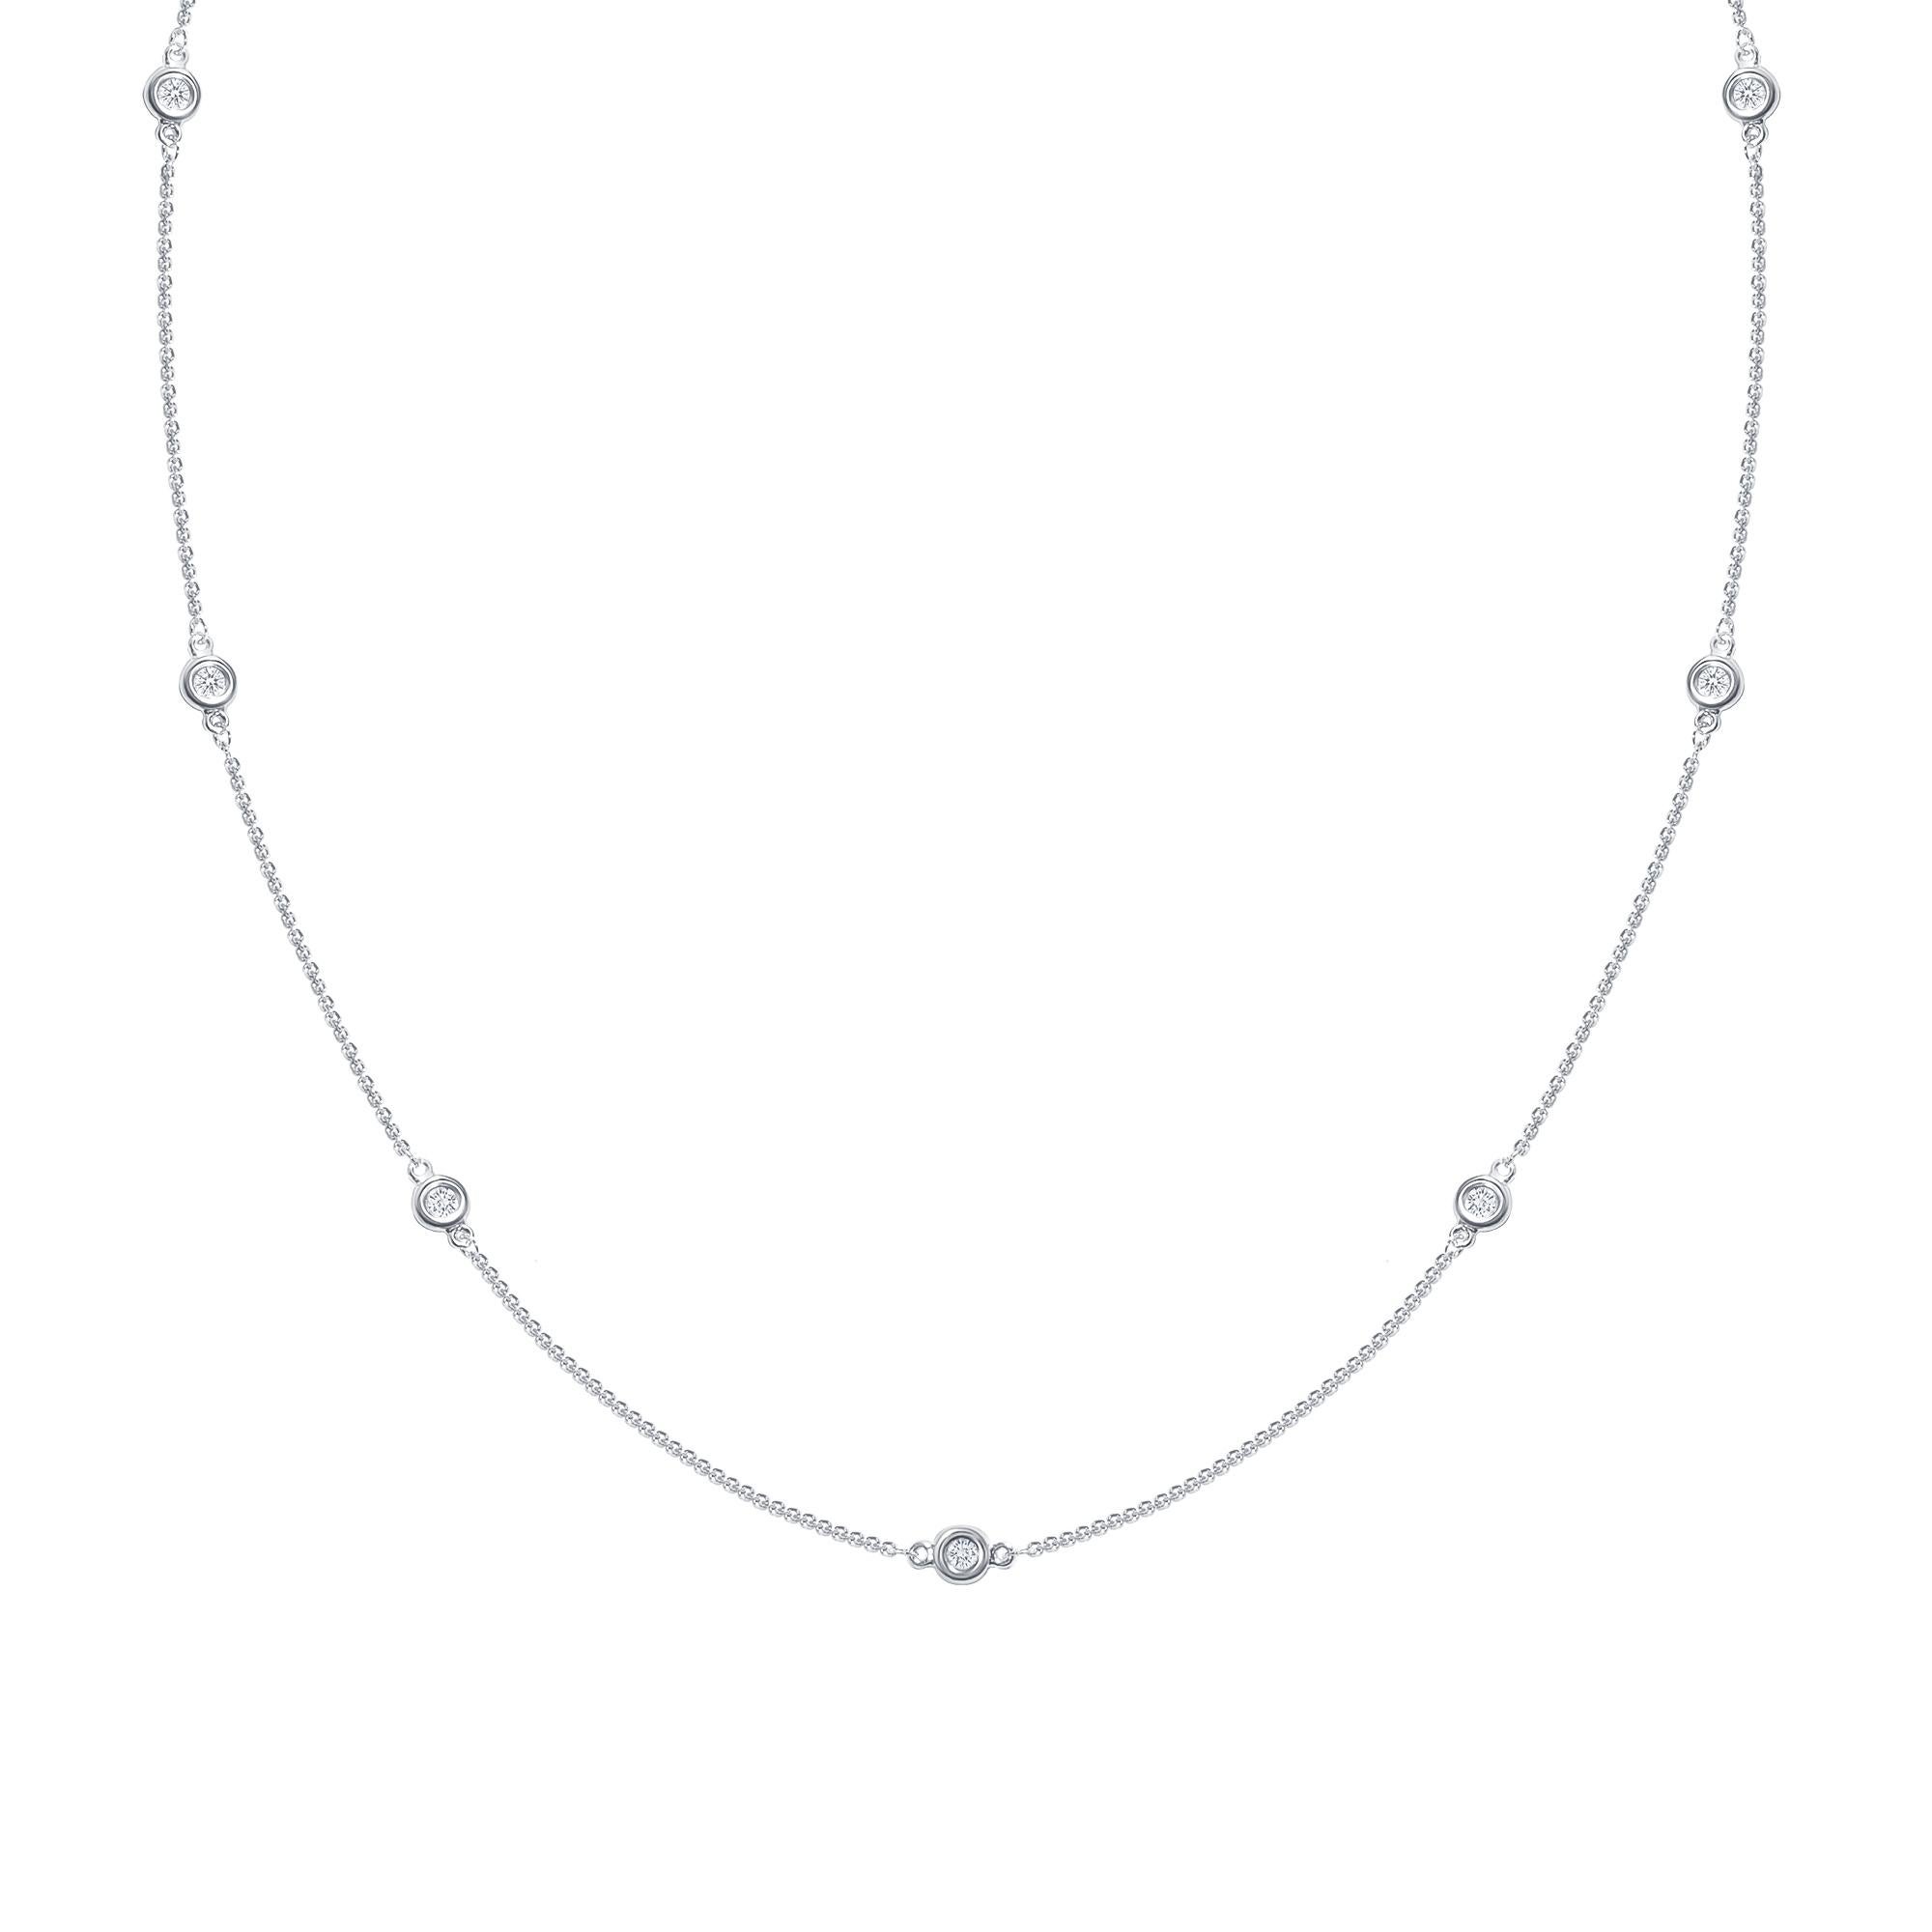 Eight elegant round diamonds set in a bezel setting along a 14k gold chain necklace.

Gold: 14K Gold
Number of Diamonds: Eight
Gold Color: White Gold
Carat: 2 Carat
Necklace Length: 24 Inches
Diamond Clarity: VS
Diamond Color: F
Chain Type: